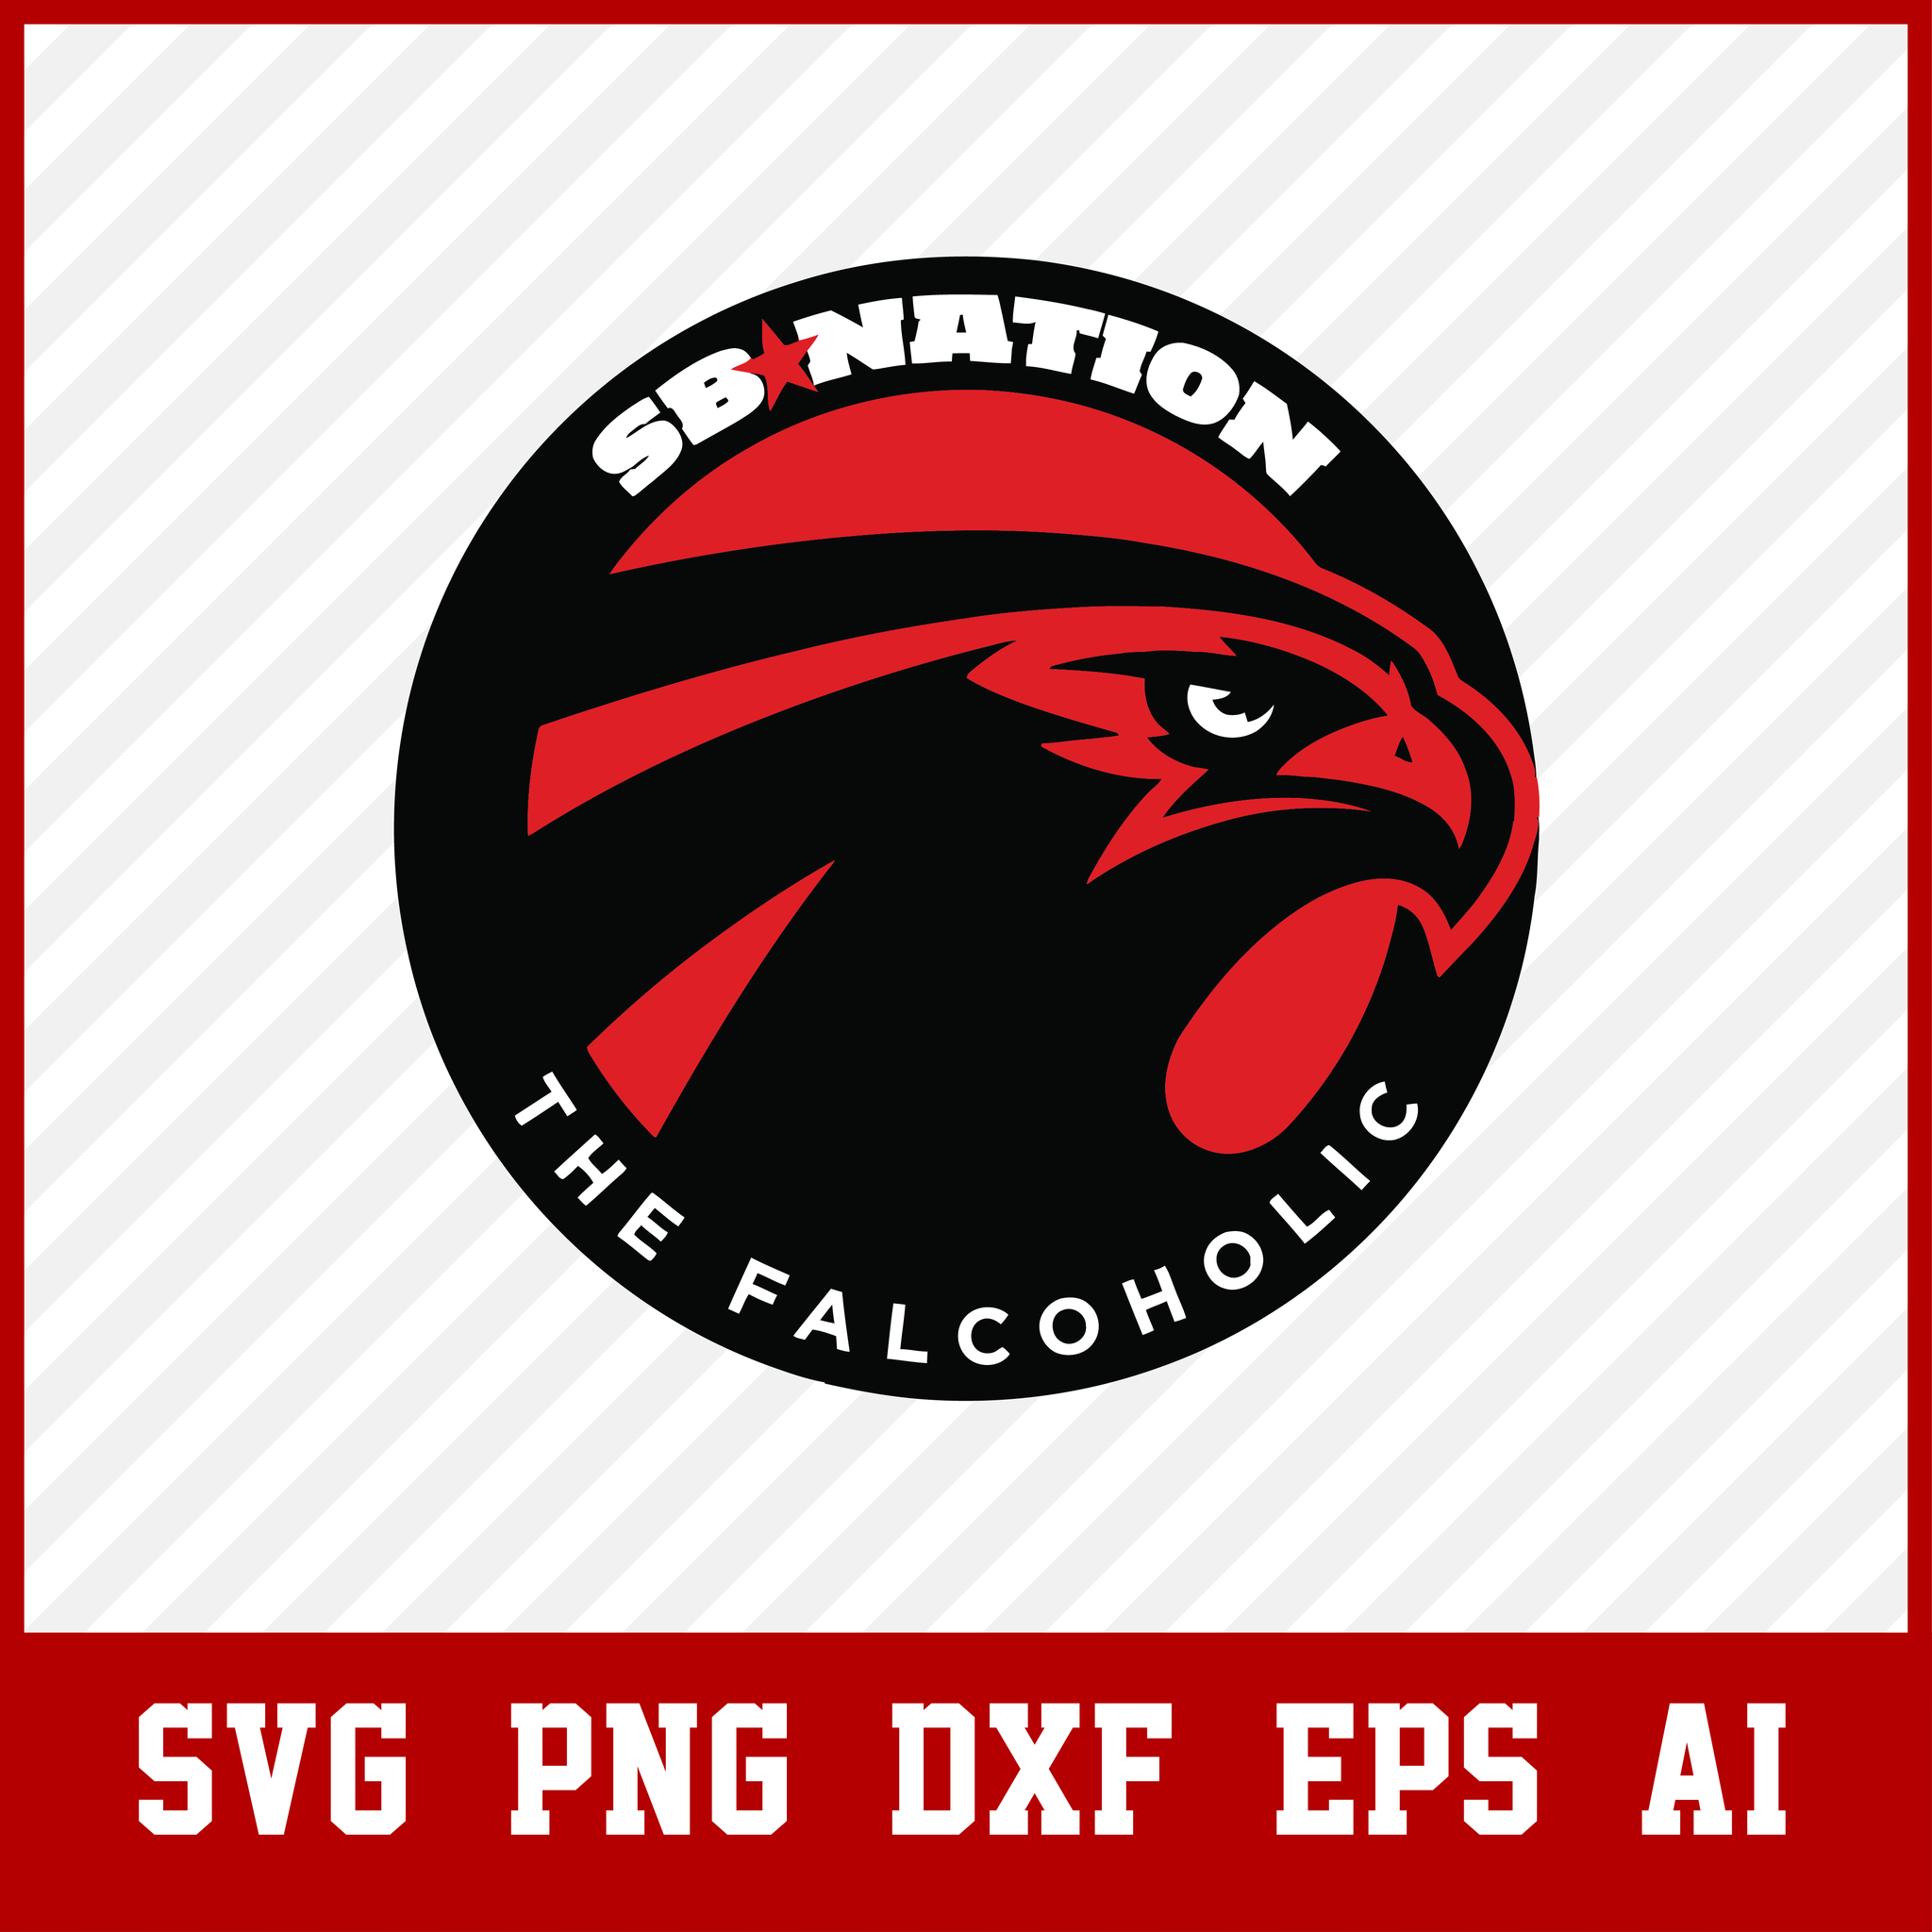 Atlanta Falcons SVG NFL Sports Logo cut file for cricut files ClipArt Digital Files vector, eps, ai, dxf, png, pdf  • INSTANT Digital DOWNLOAD includes: 1 Zip and the following file formats: SVG, DXF, PNG, AI, PDF  • Artwork files are perfect for printing, resizing, coloring and modifying with the appropriate software.  • These digital clip art files are perfect for any projects such as: Scrap booking, paper goods, DIY invitations & announcements, clothing and accessories, party favors, cupcake toppers, lab